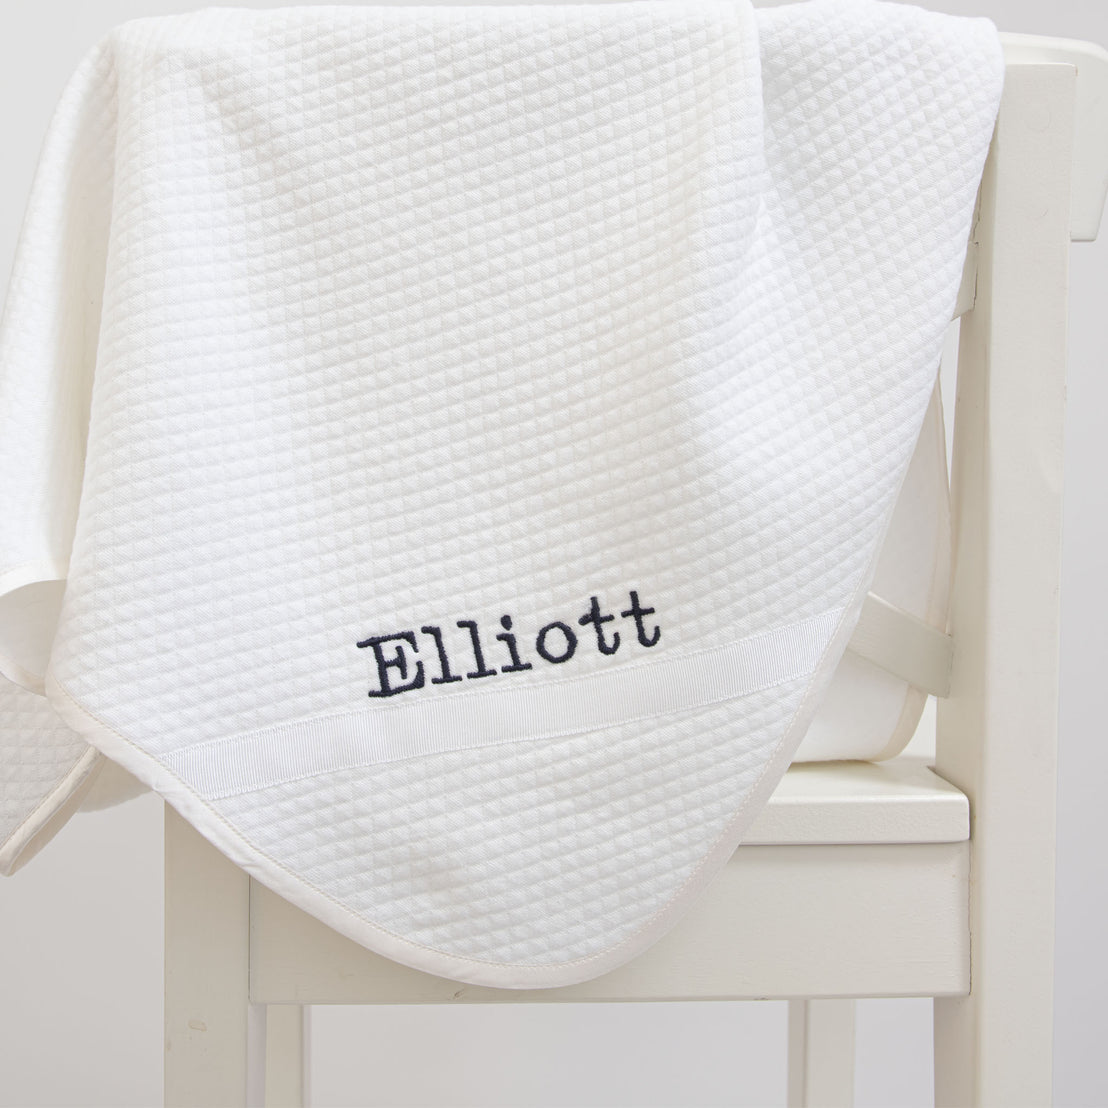 Flat lay photo of the Elliott Personalized Blanket, a soft white 100% quilted cotton, one corner is detailed with ribbon and the name "Elliott" embroidered in black..